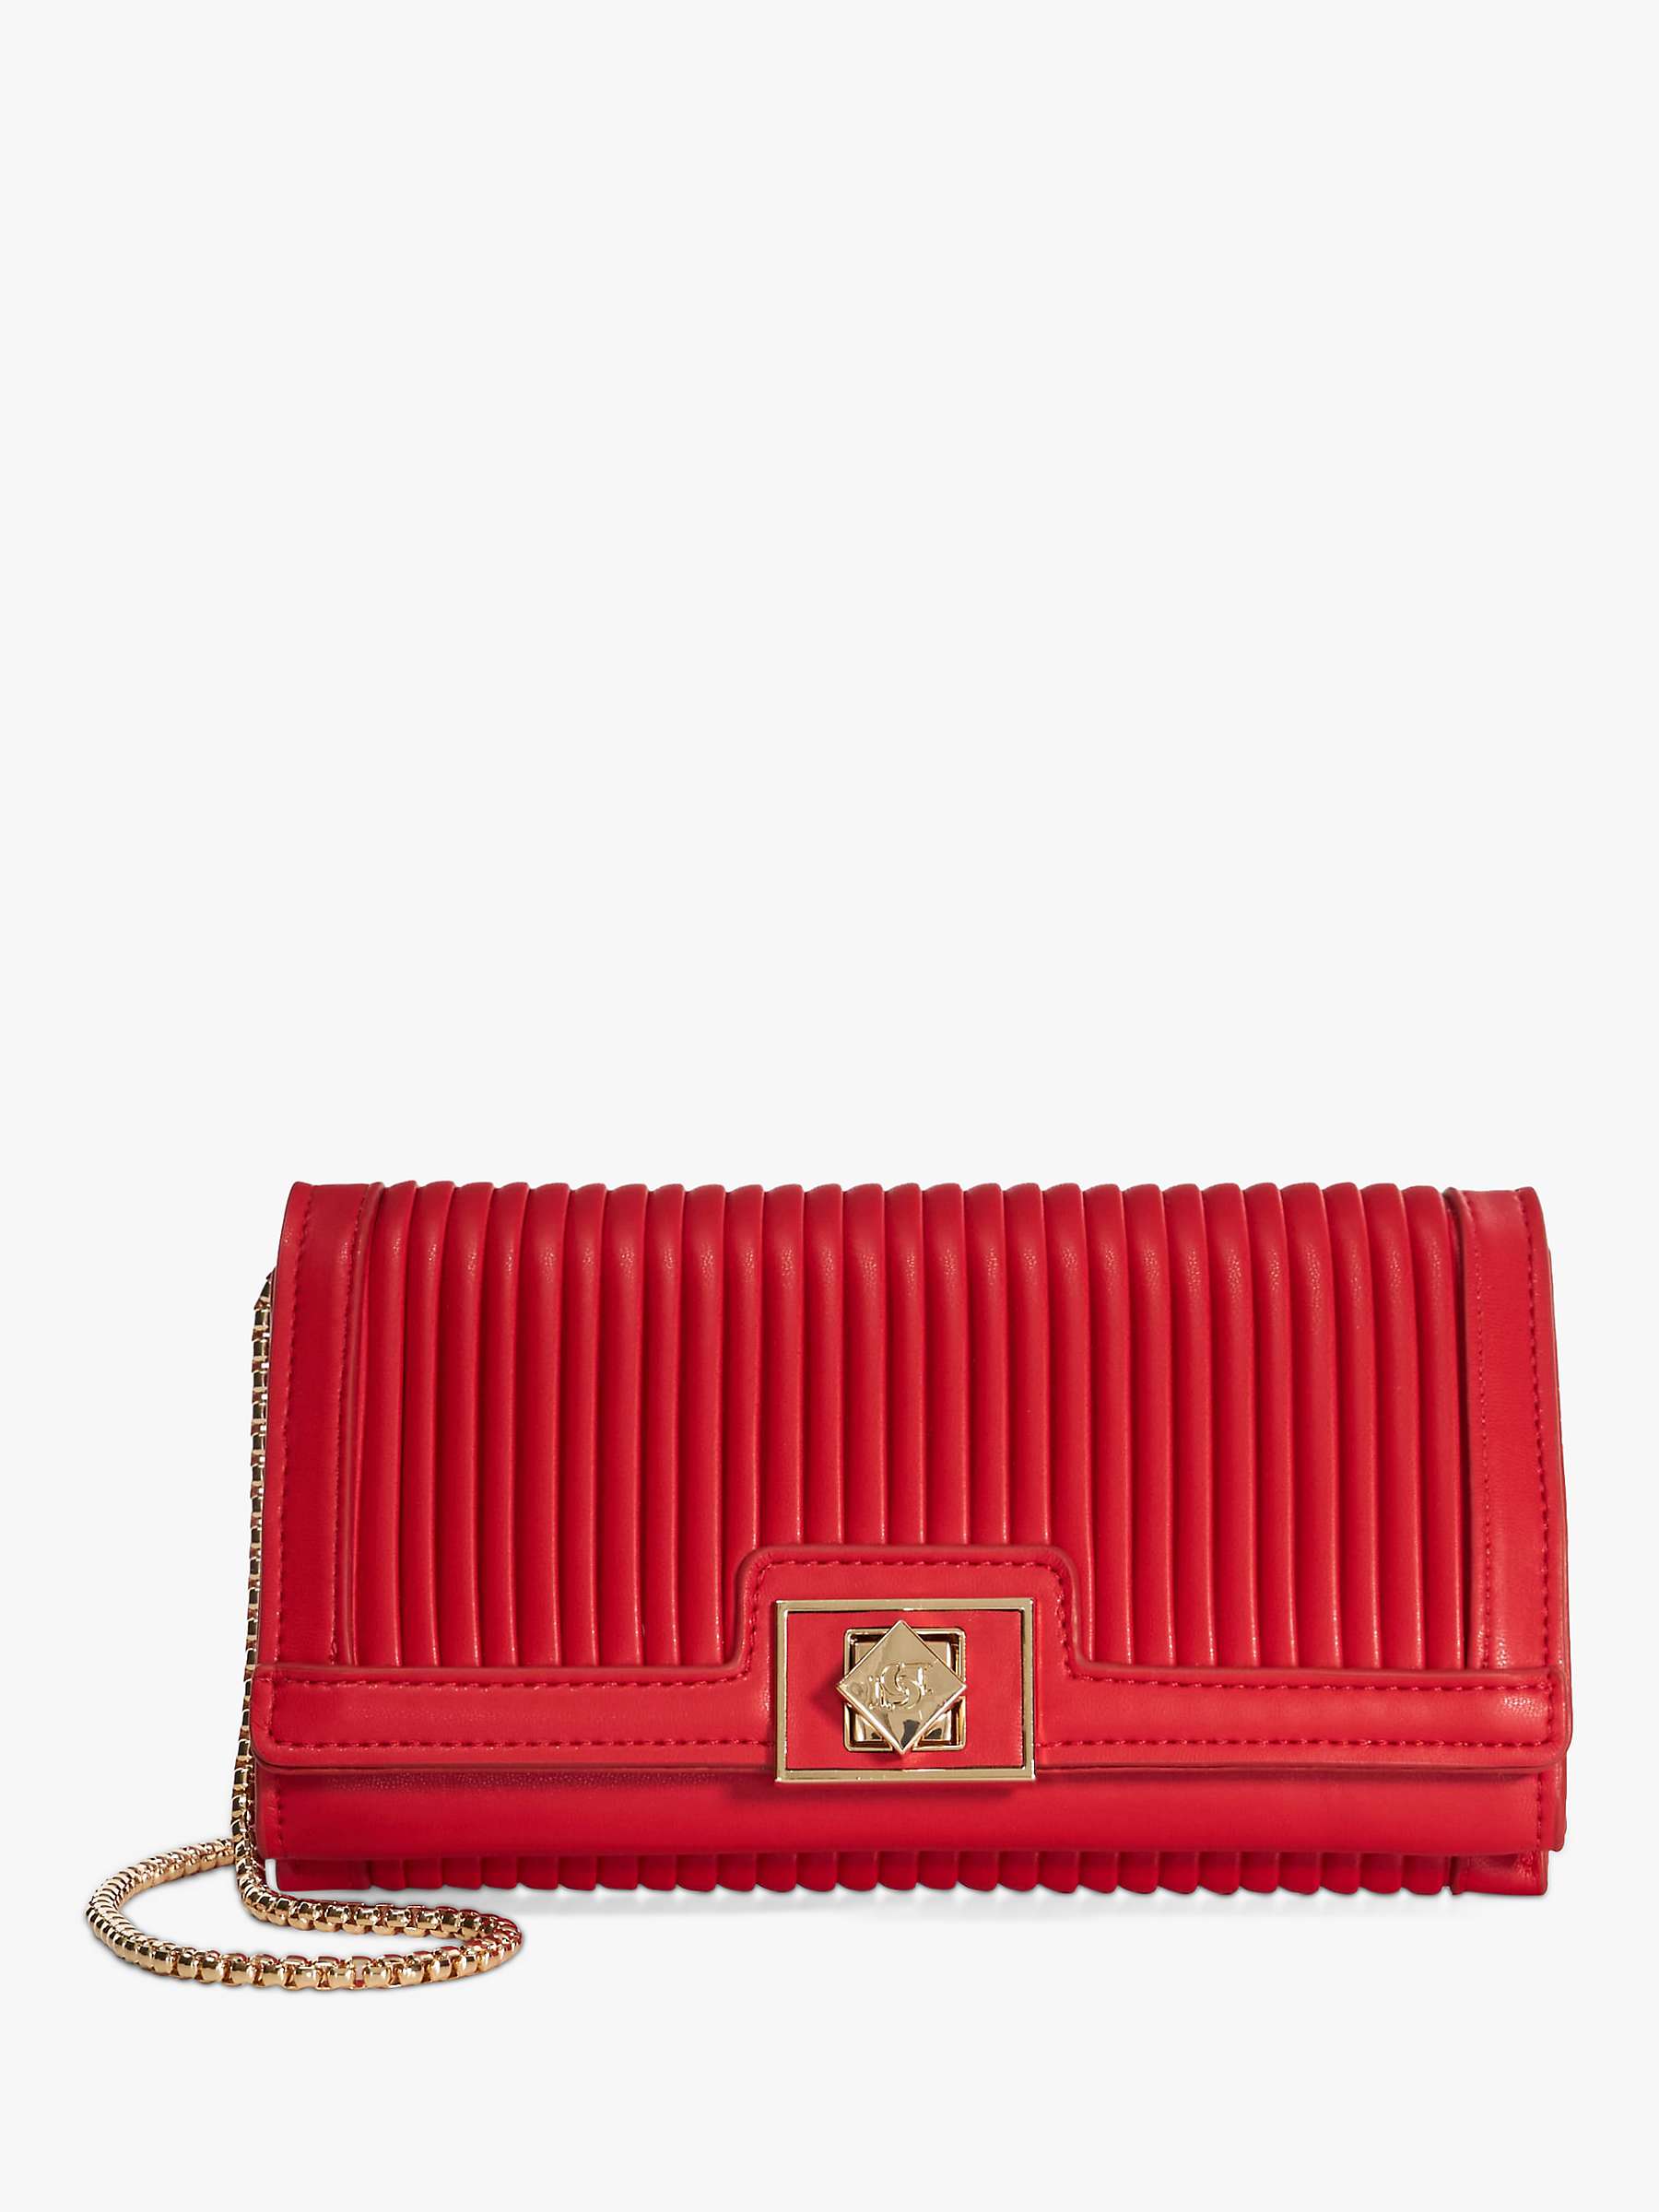 Buy Dune Serenities Pleated Clutch Bag, Red Online at johnlewis.com